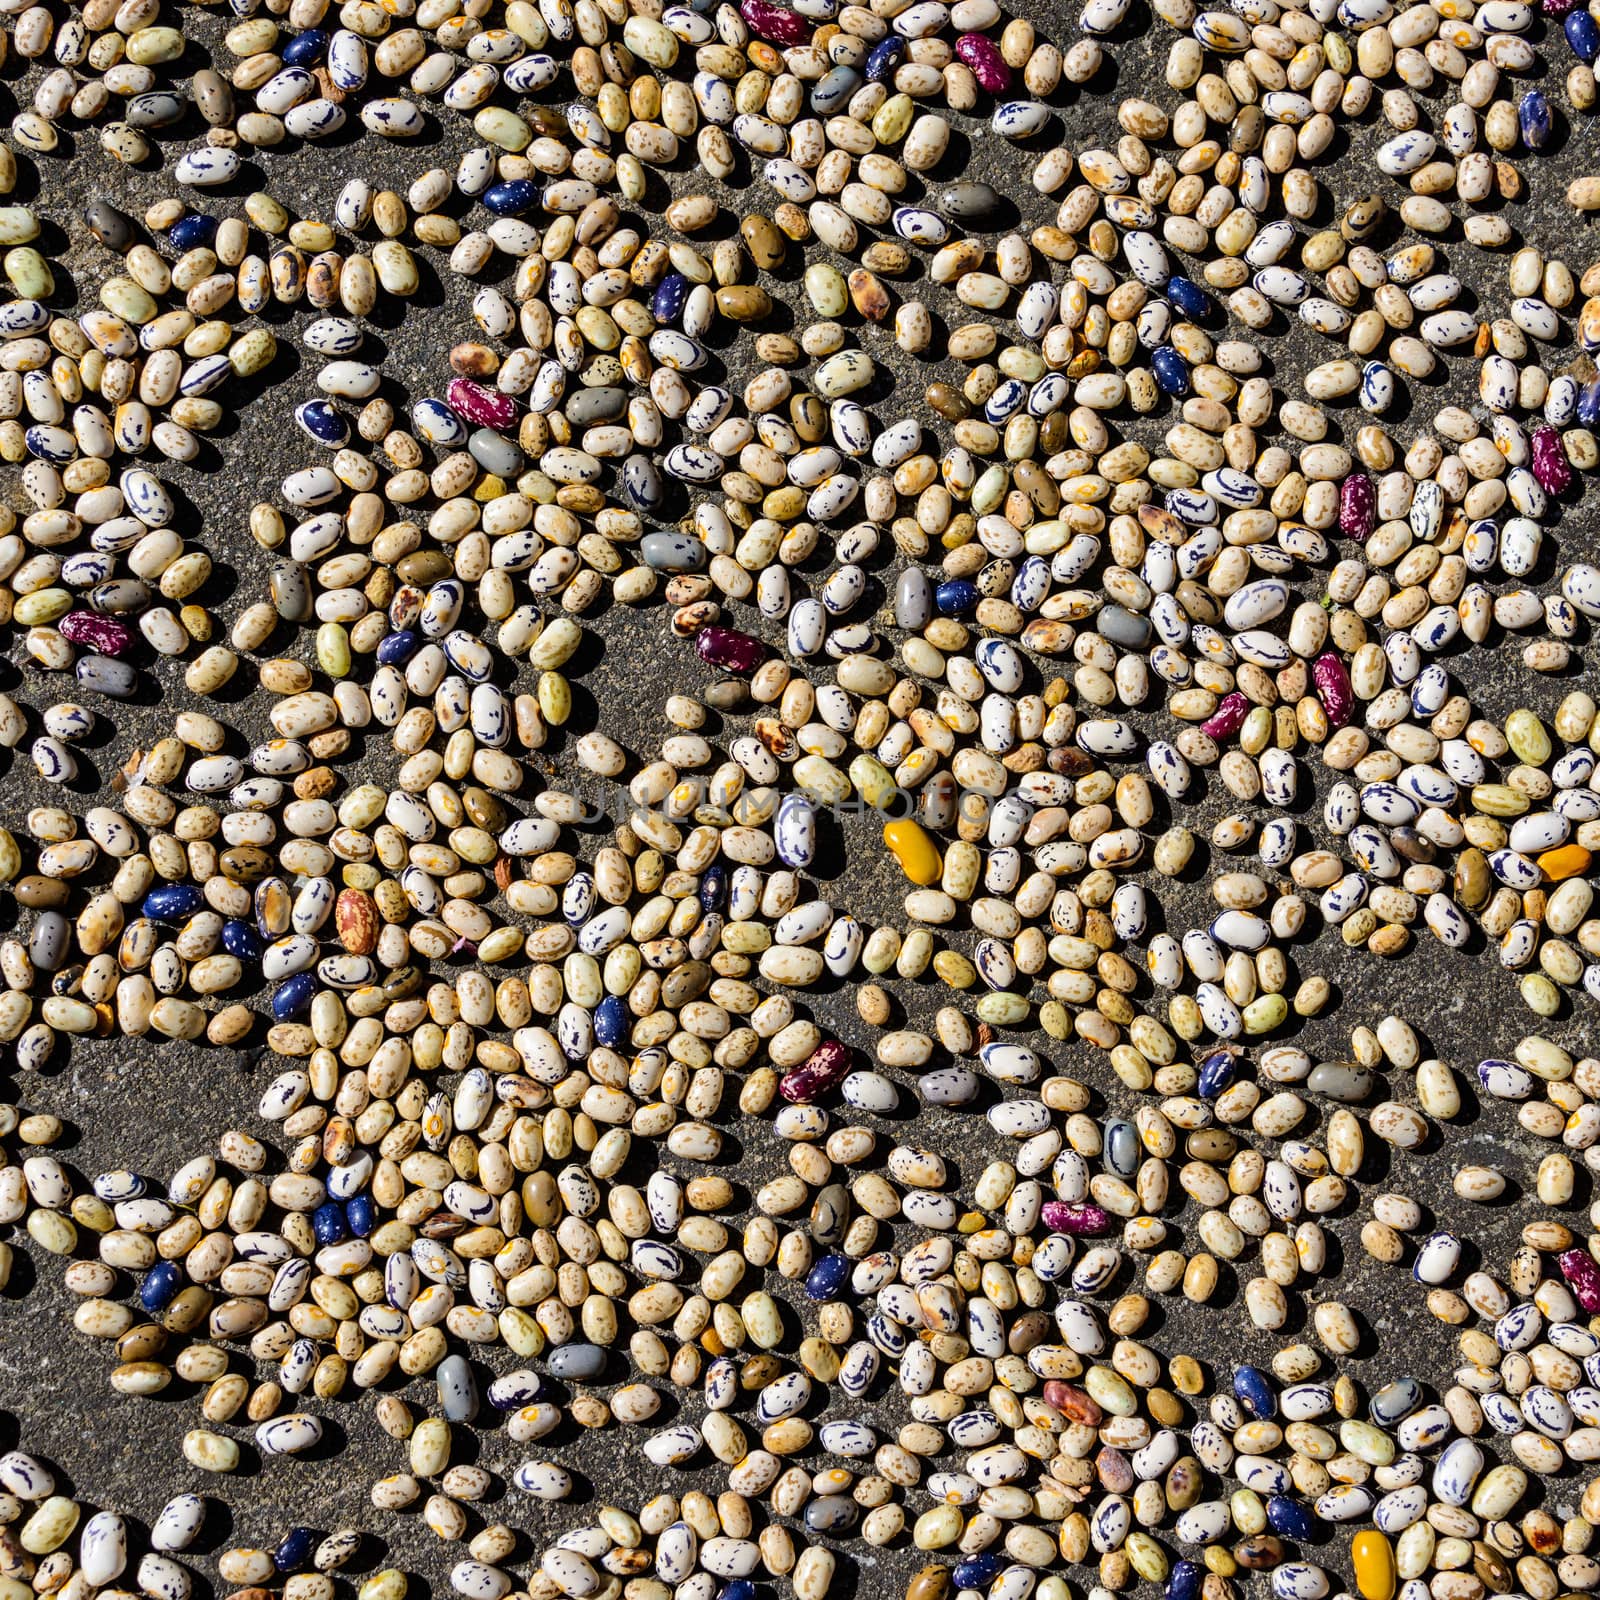 Colorful beans drying in the sun